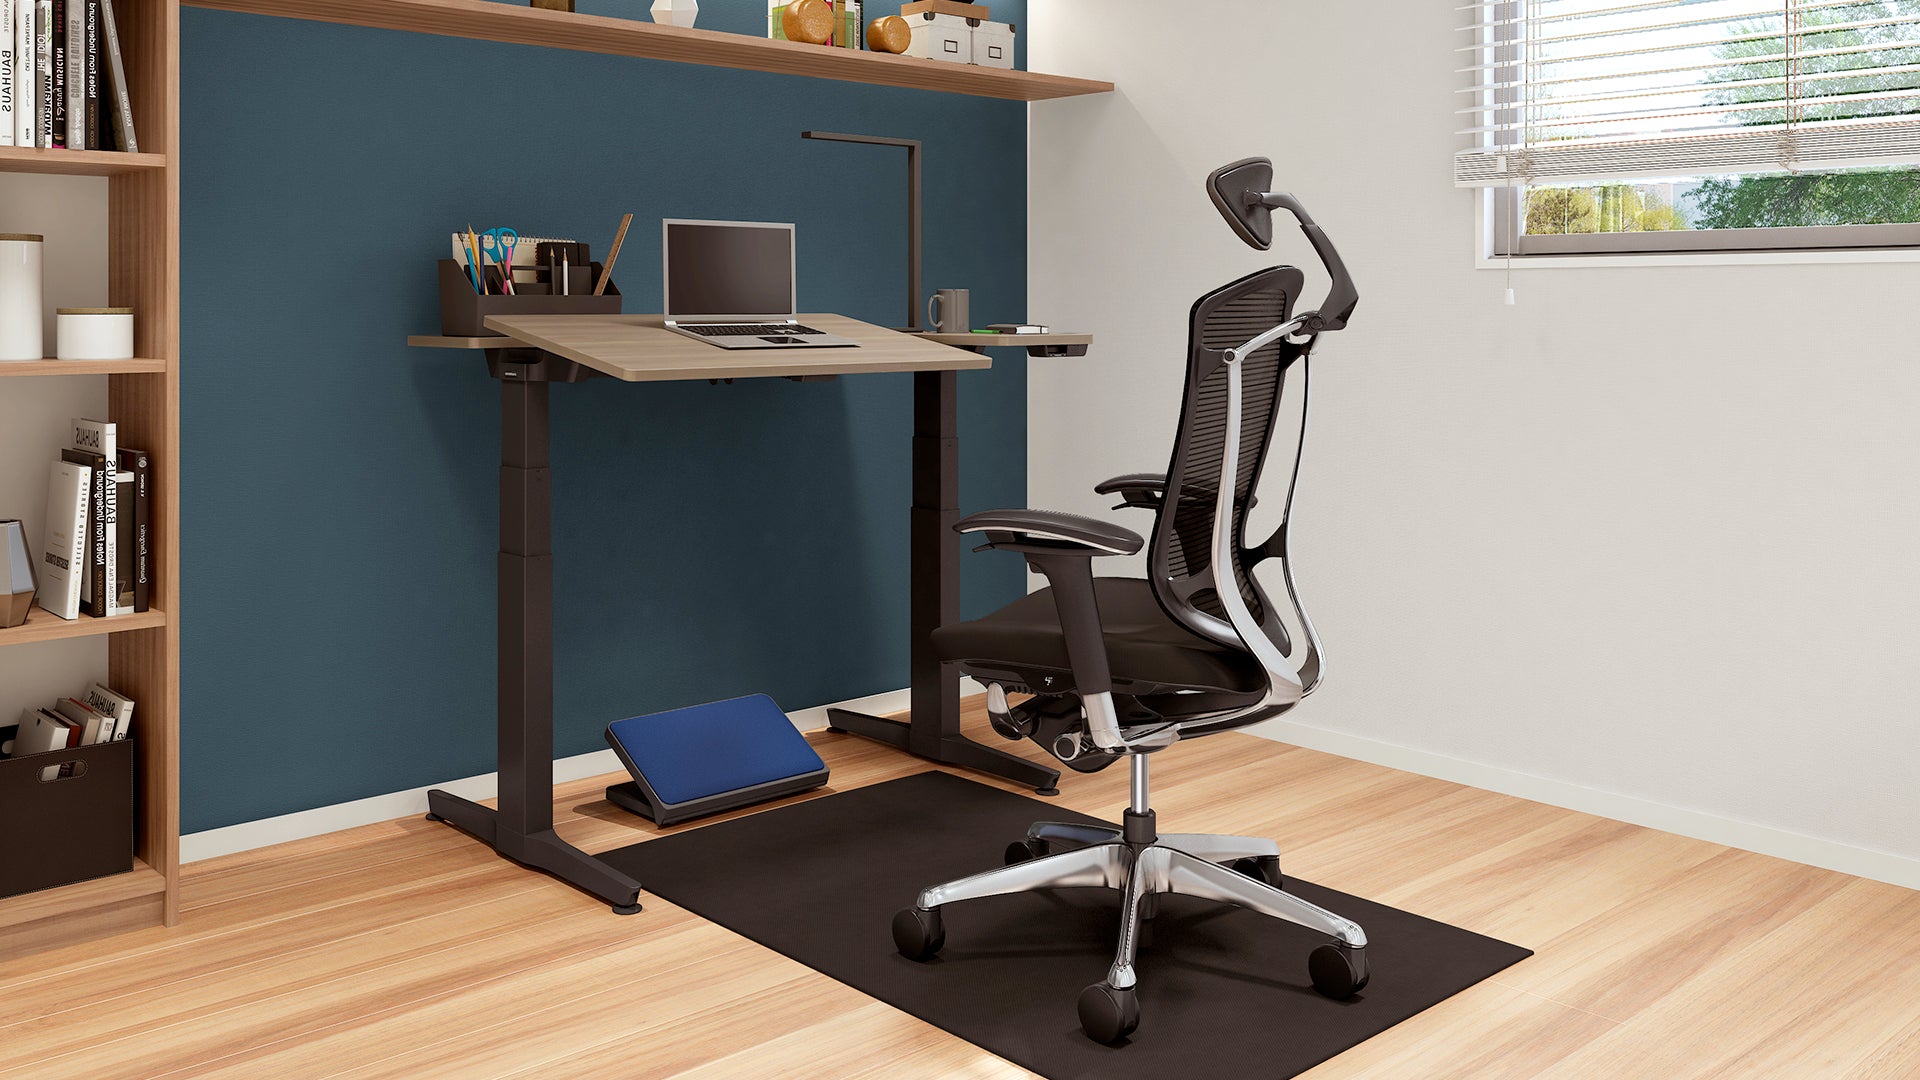 4 key points to consider when looking for an ergonomic chair